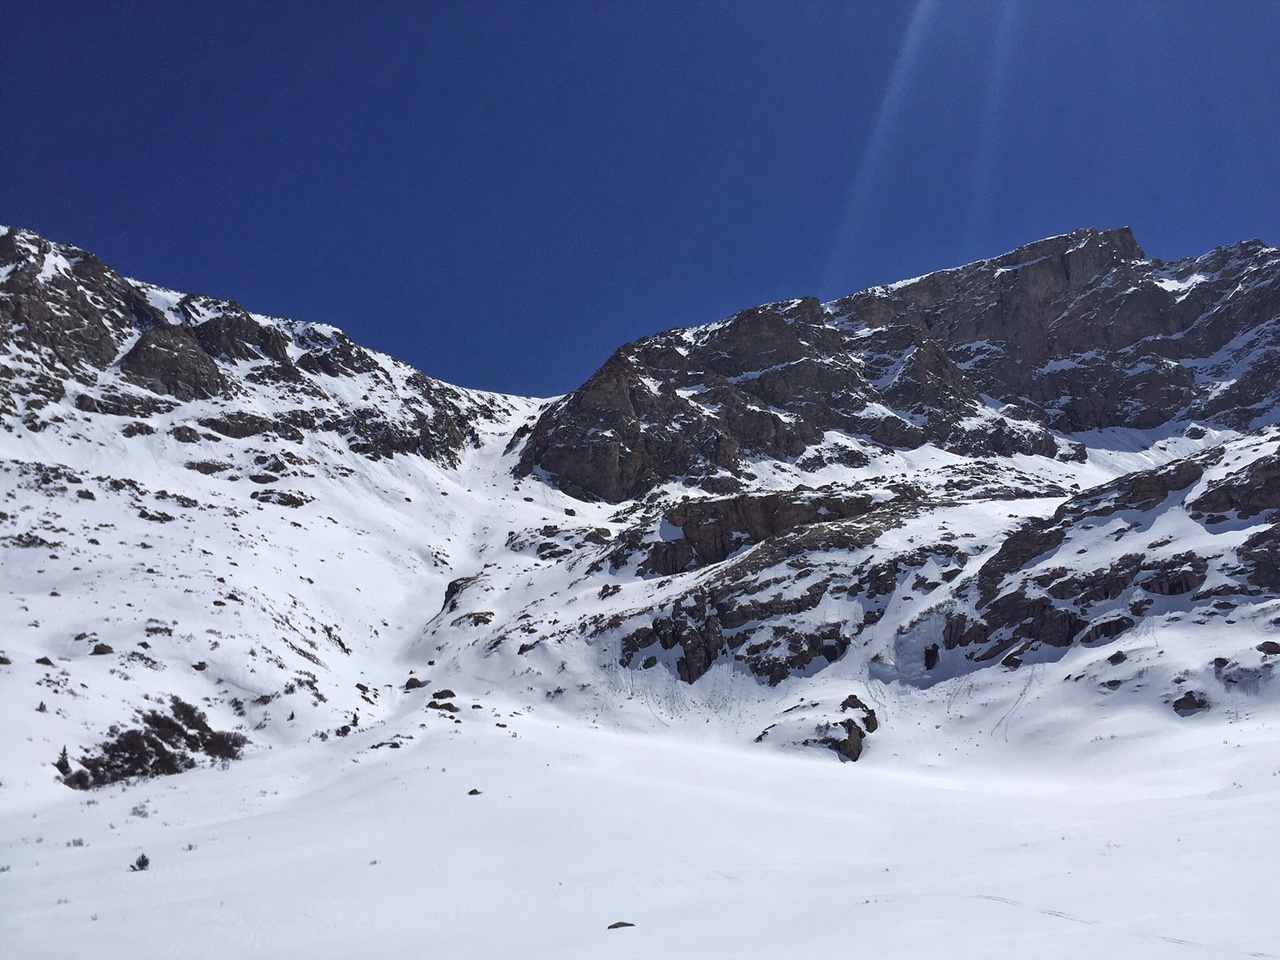 Looking up the Couloir after skiing it, then heading up Bierstadt.